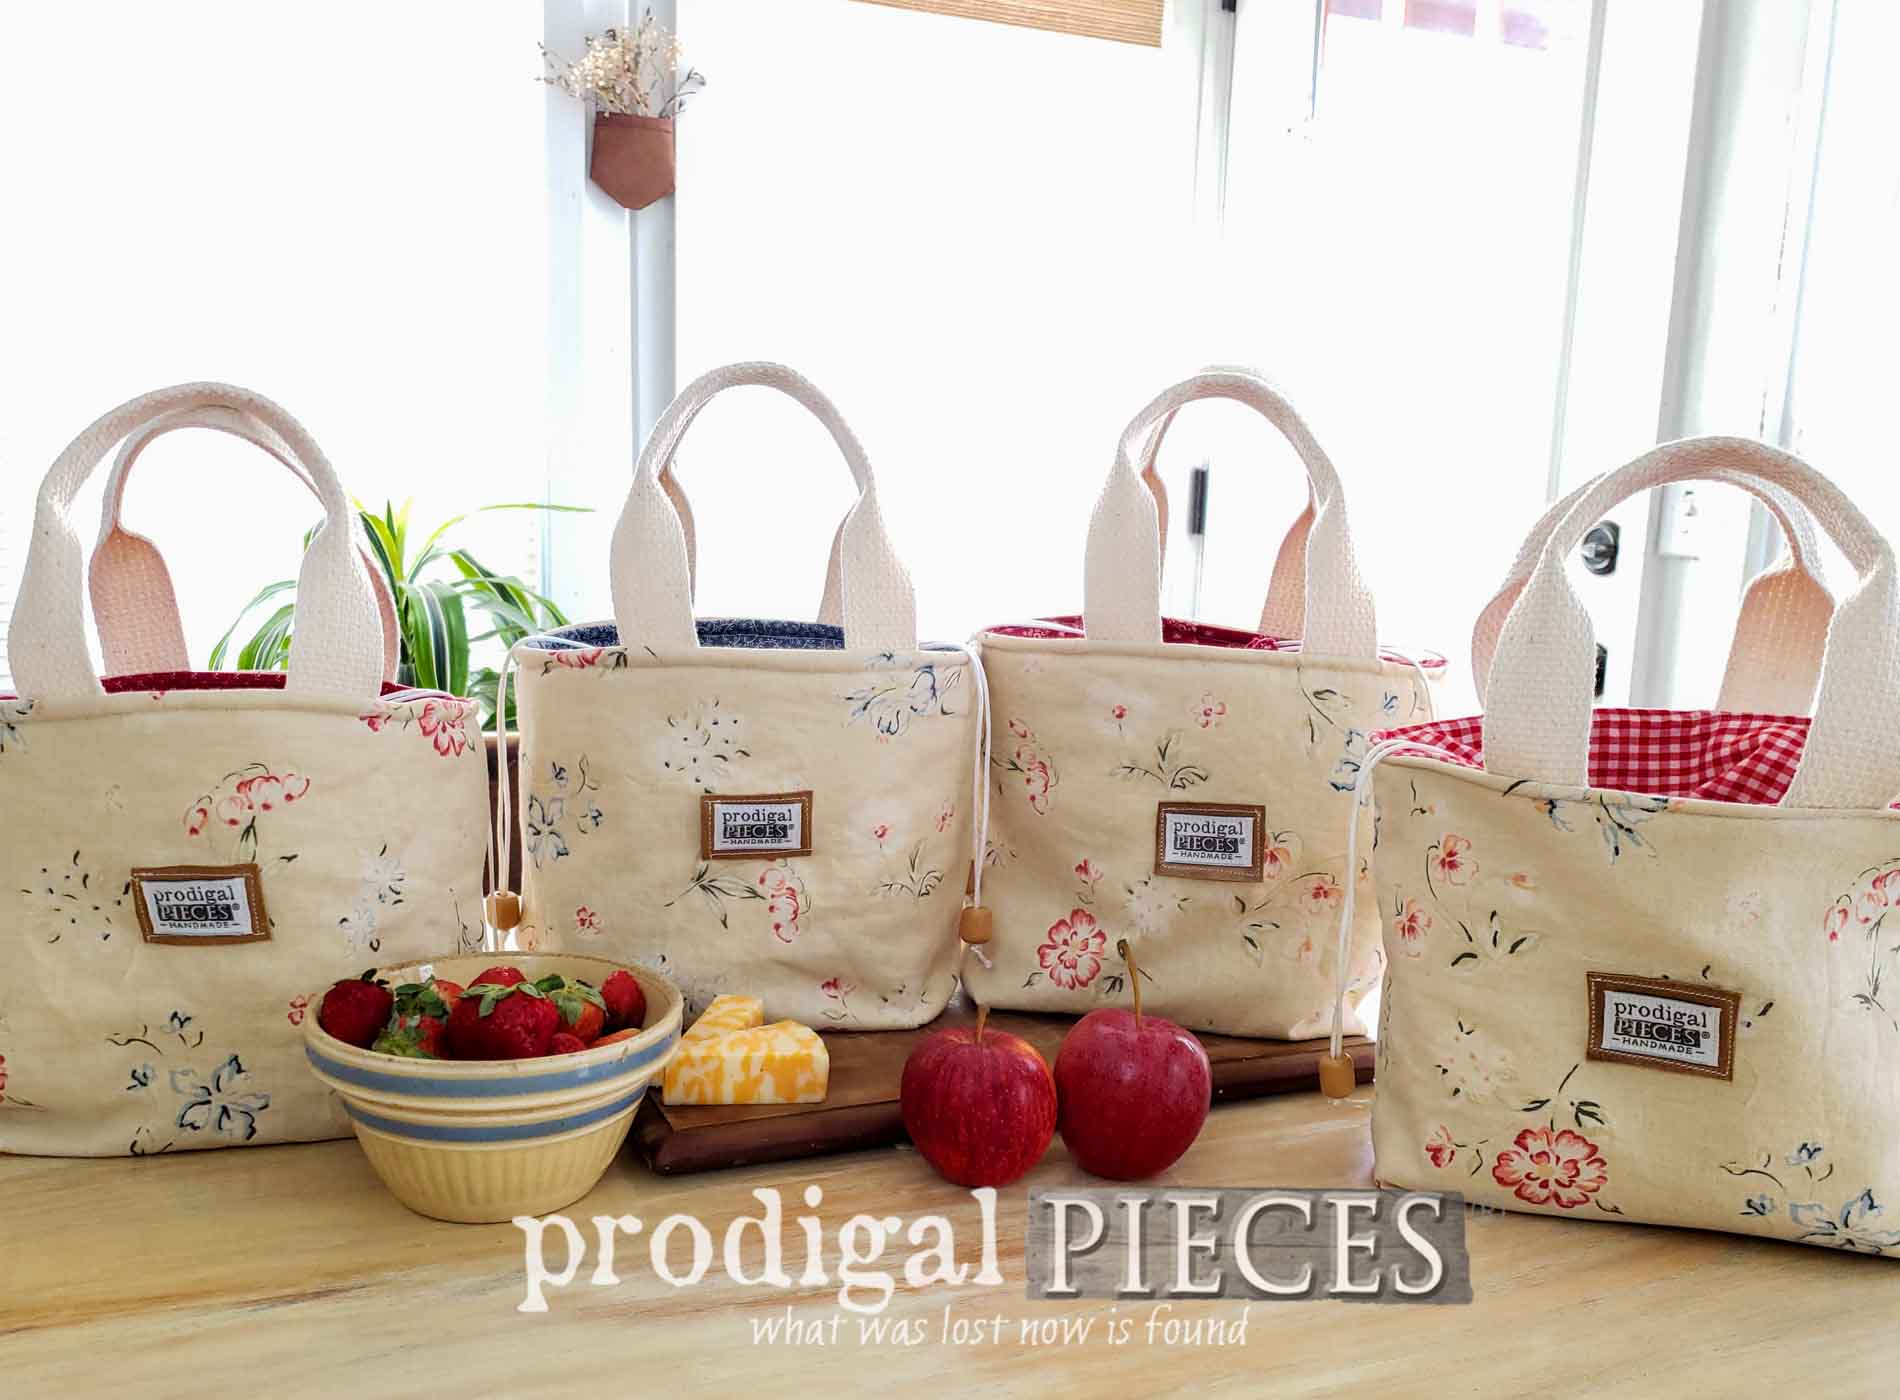 Featured DIY Insulated Lunch Bag from Upcycled Linen Skirts by Larissa of Prodigal Pieces | prodigalpieces.com #prodigalpieces #diy #handmade #fashion #sewing #home #accessories